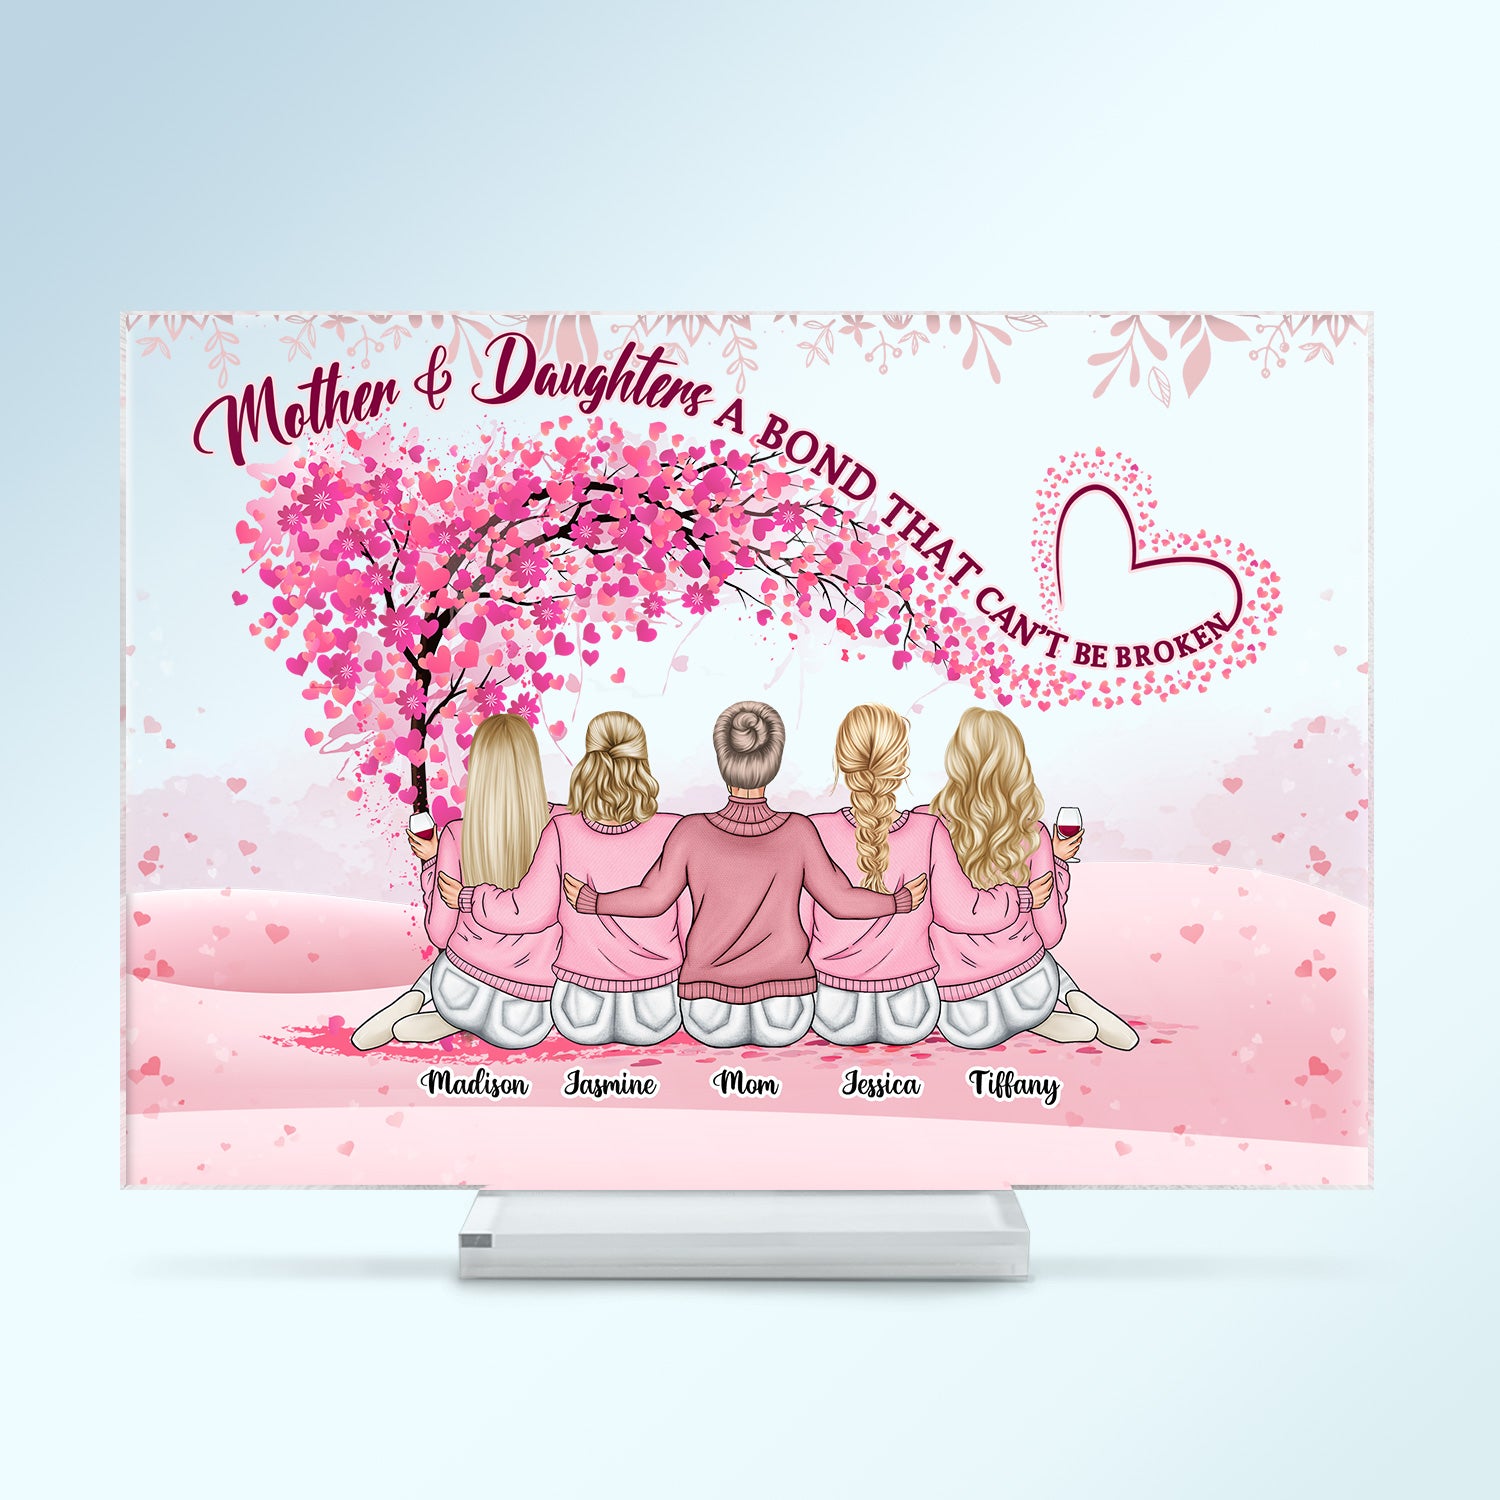 Mother & Daughter A Bond Can't Be Broken - Gift For Mother - Personalized Custom Horizontal Rectangle Acrylic Plaque